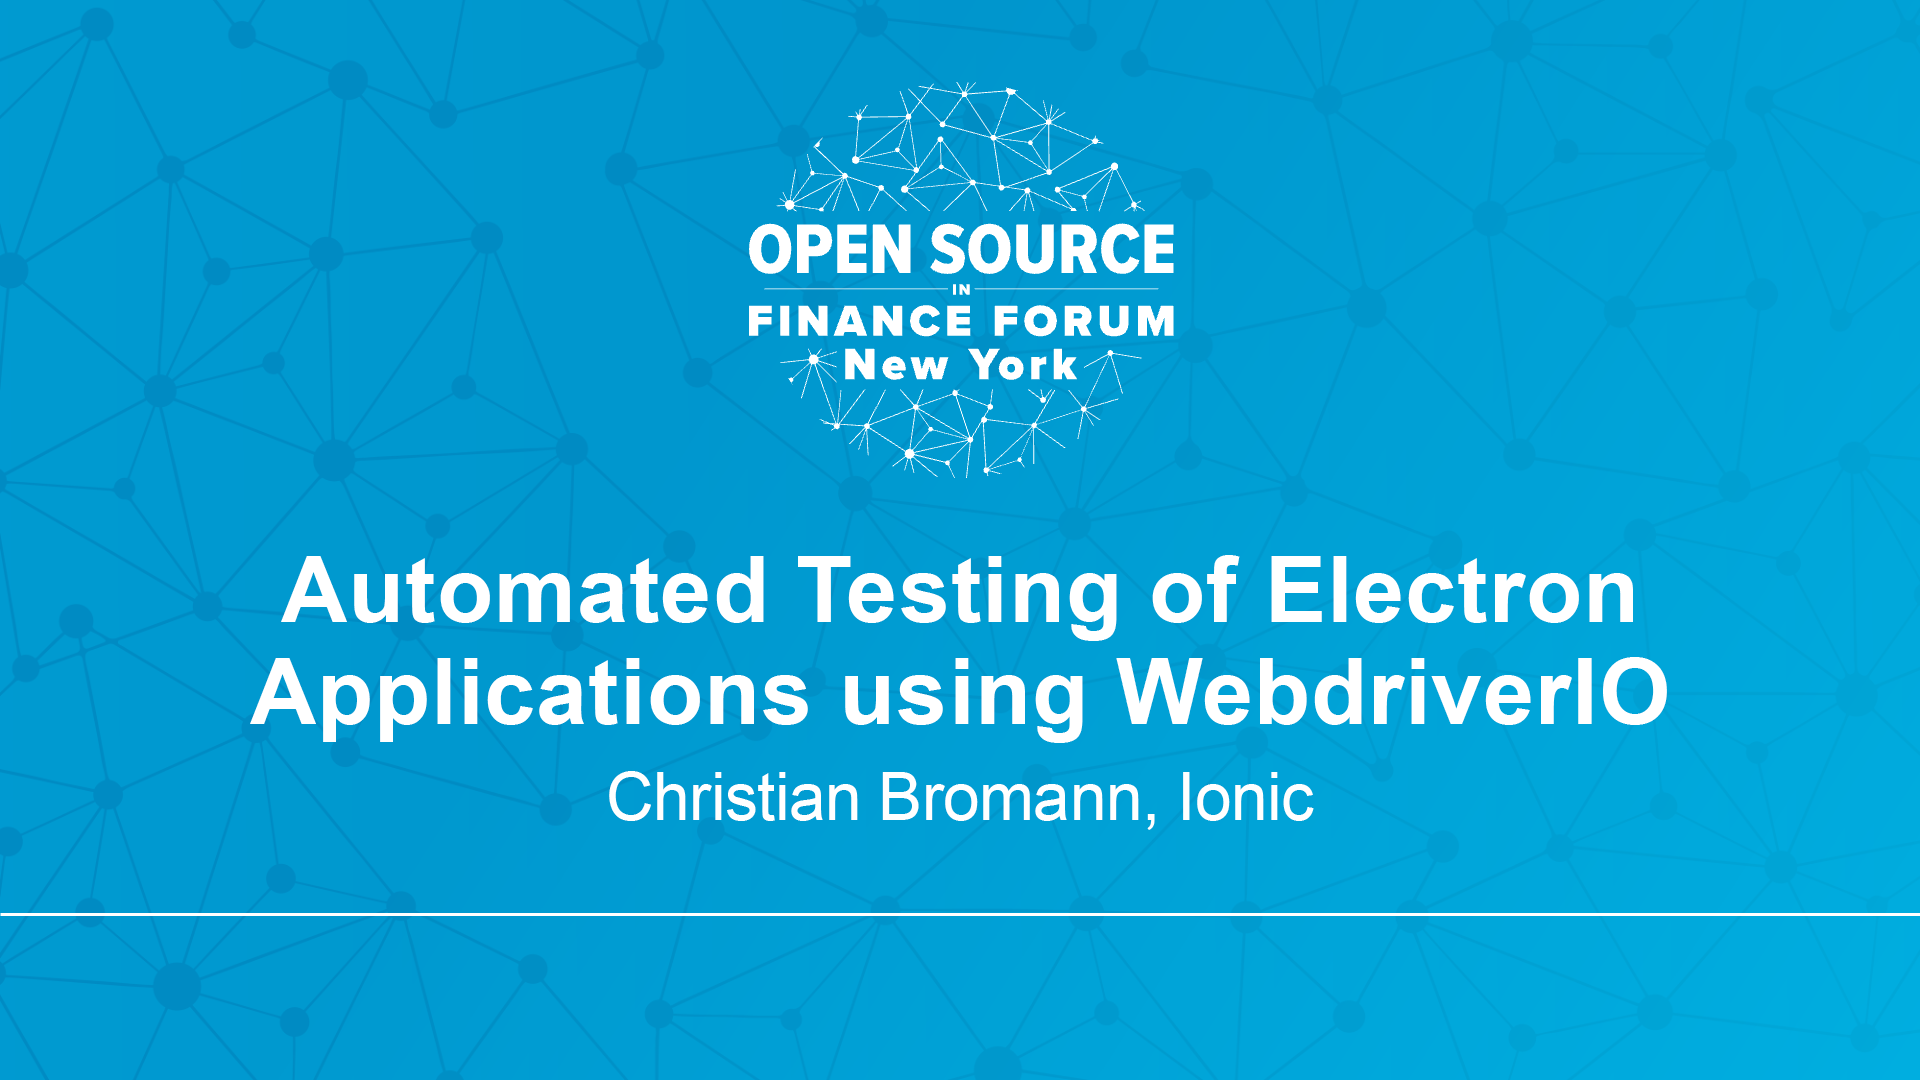 Automated Testing of Electron Applications using WebdriverIO - Christian Bromann, Ionic